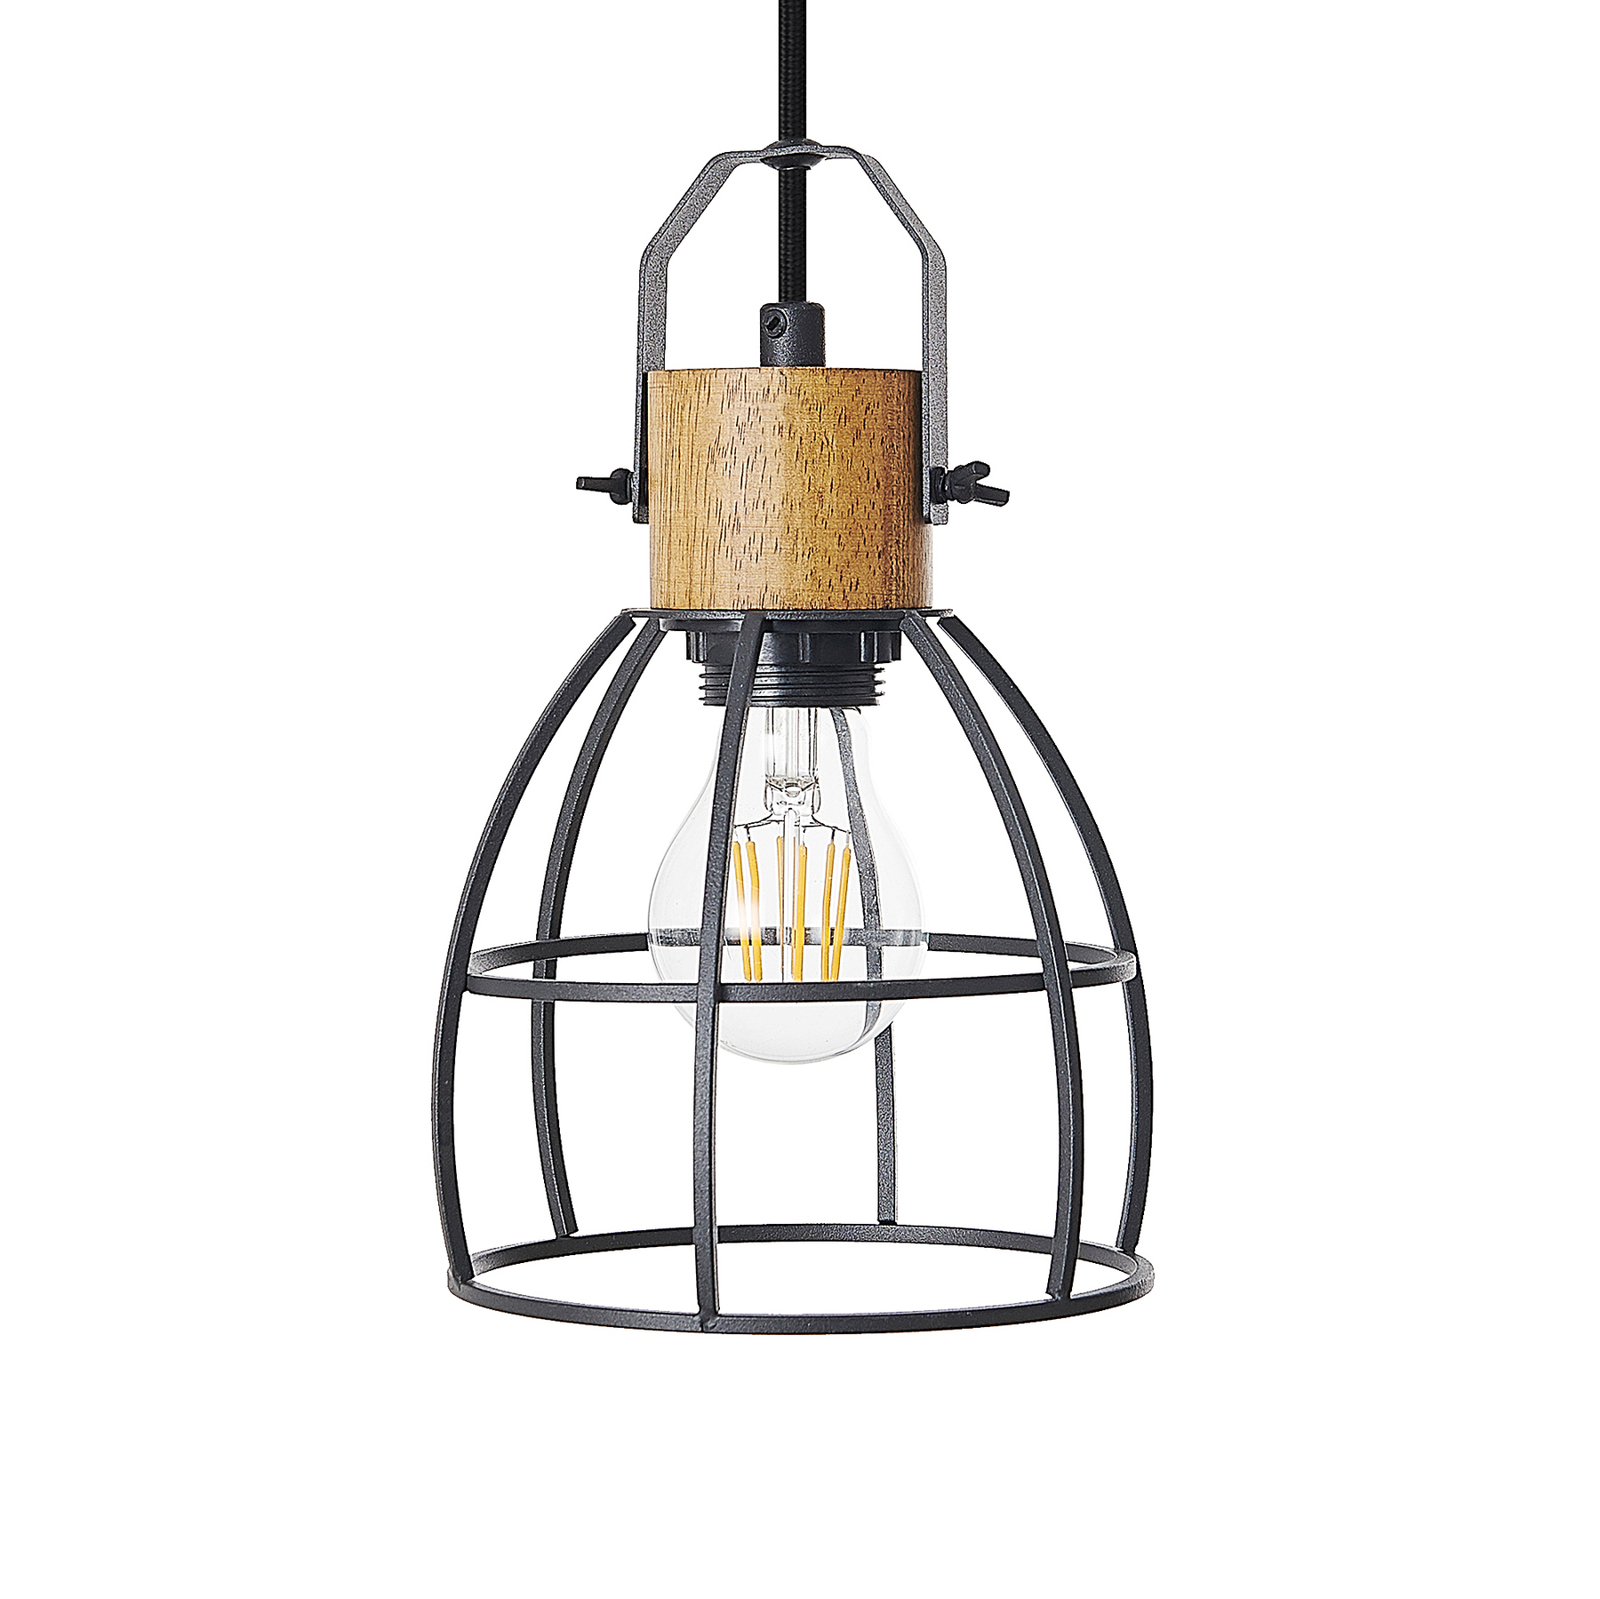 Lindby Flintos hanglamp, 3-lamps, hout licht